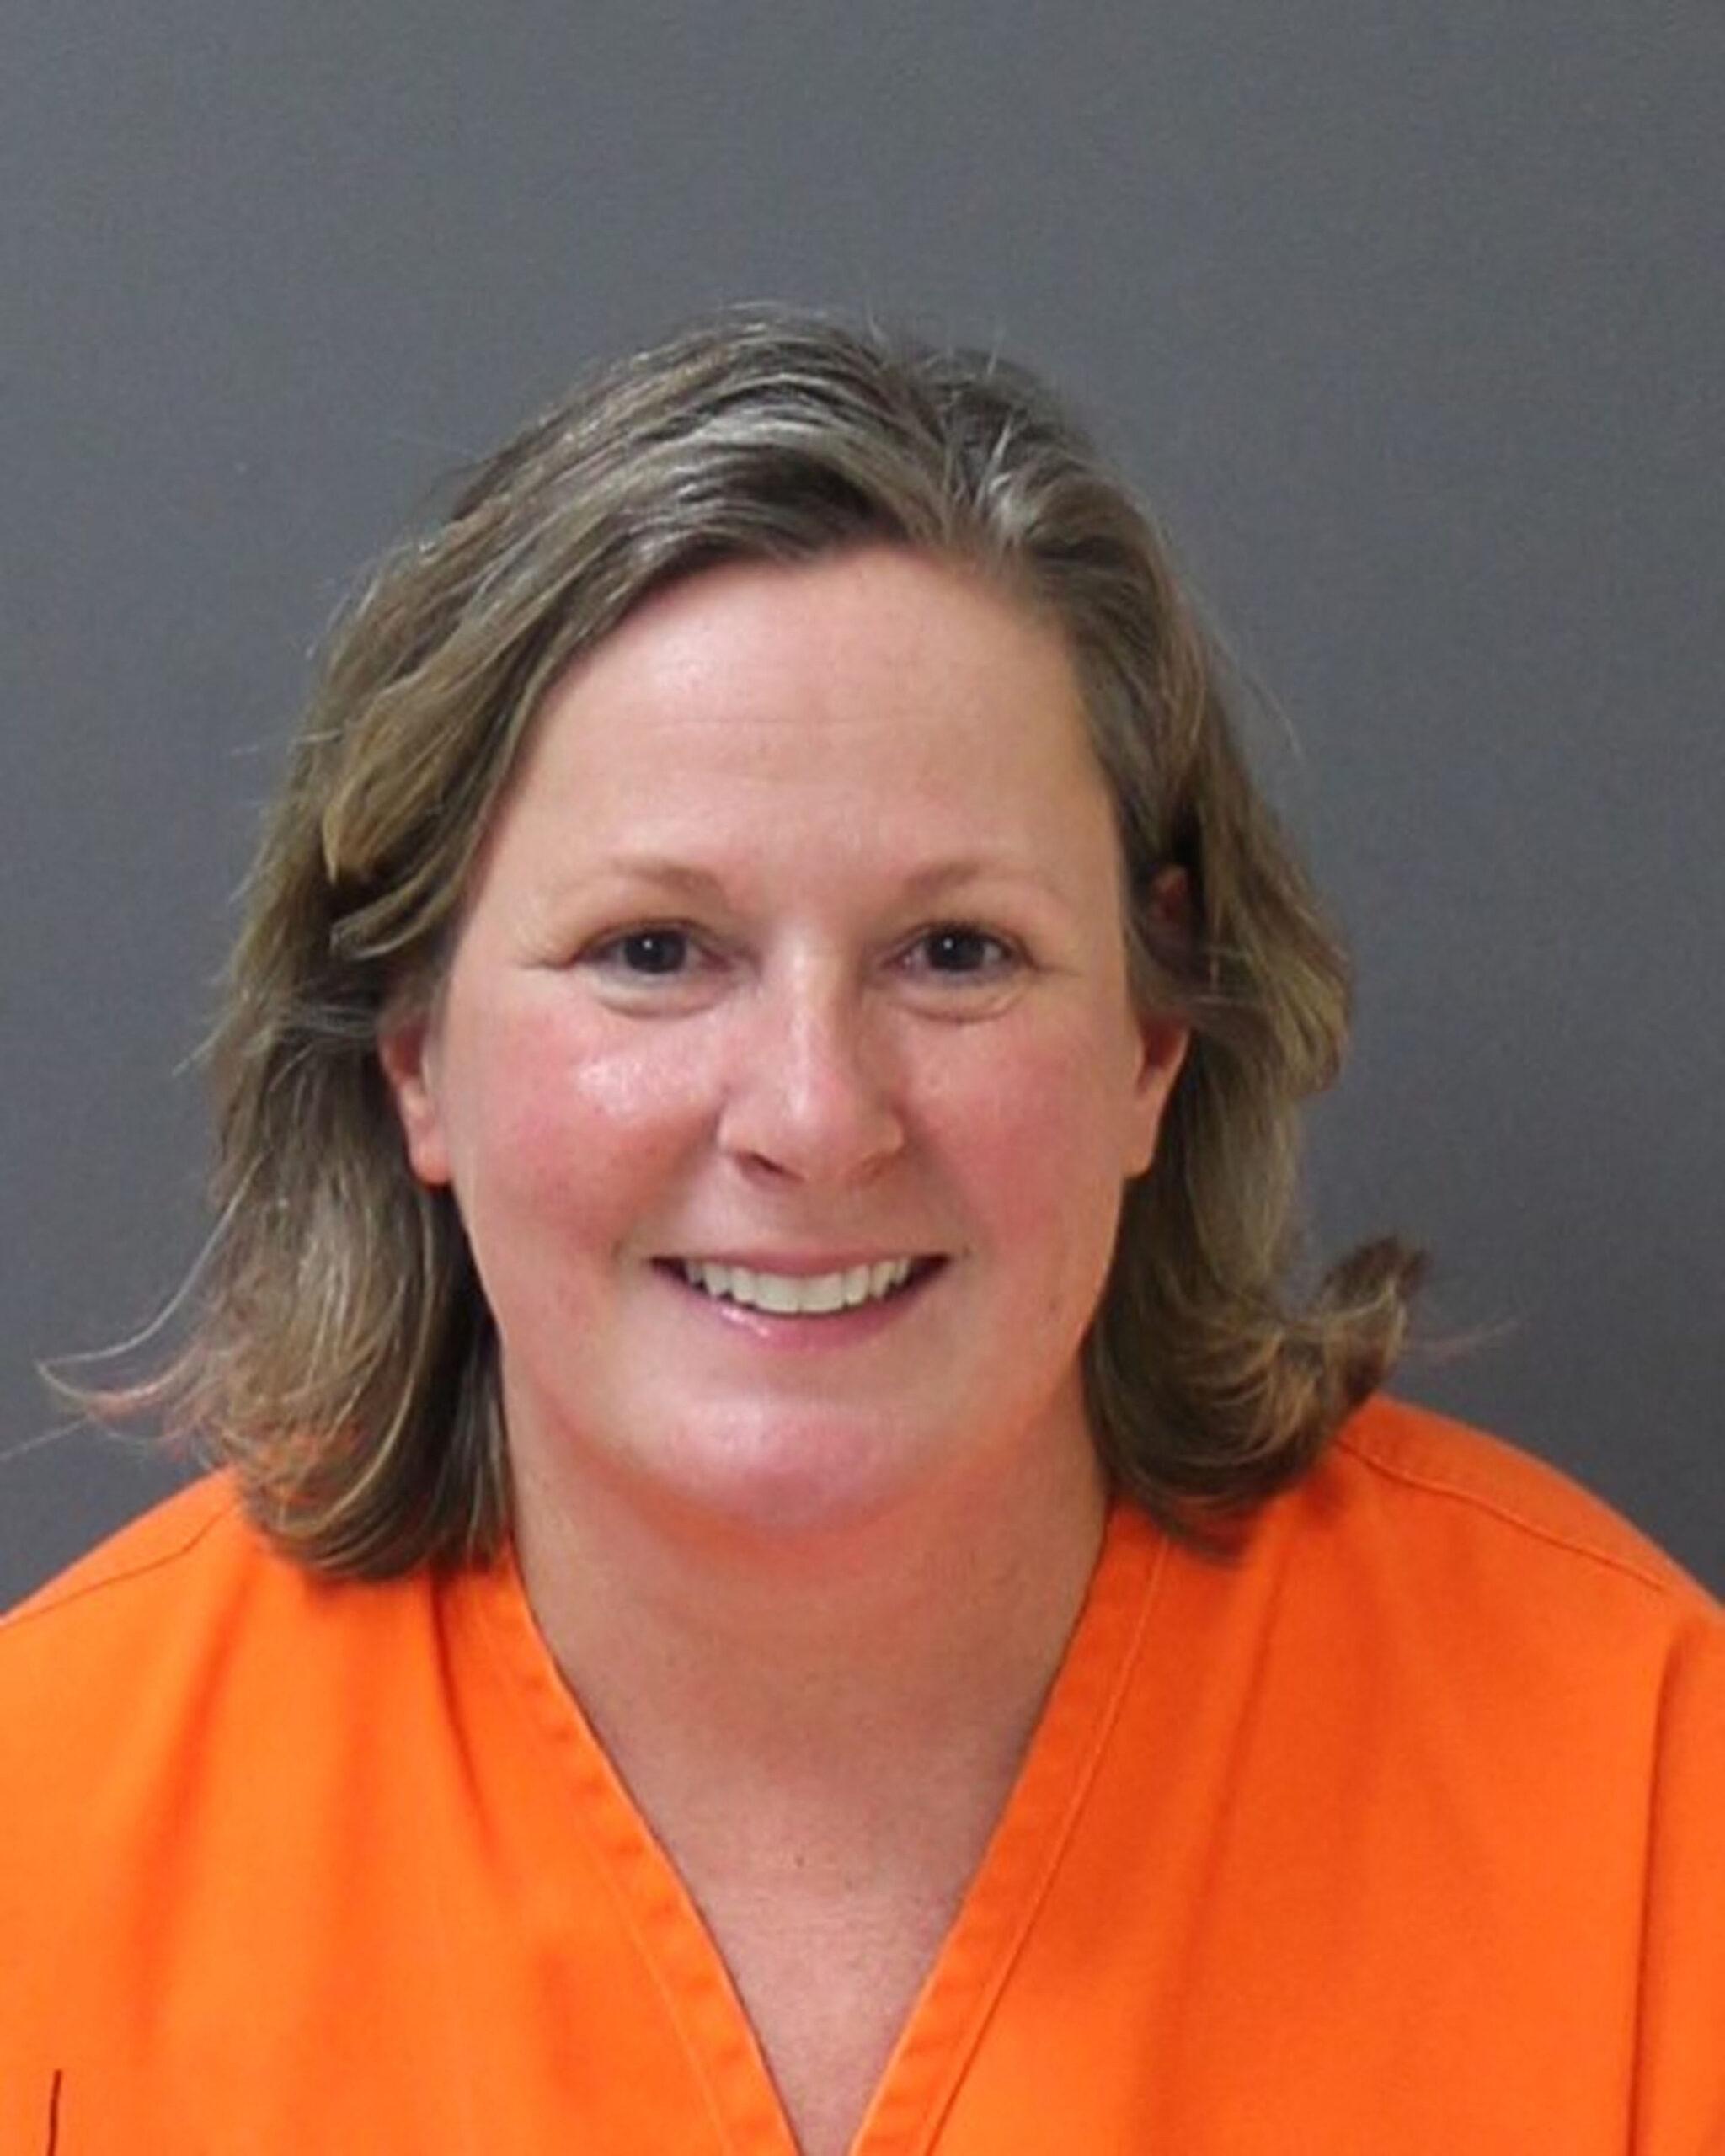 Ex-cop Kim Potter smiles in her mugshot after being found guilty of Daunte Wright manslaughter